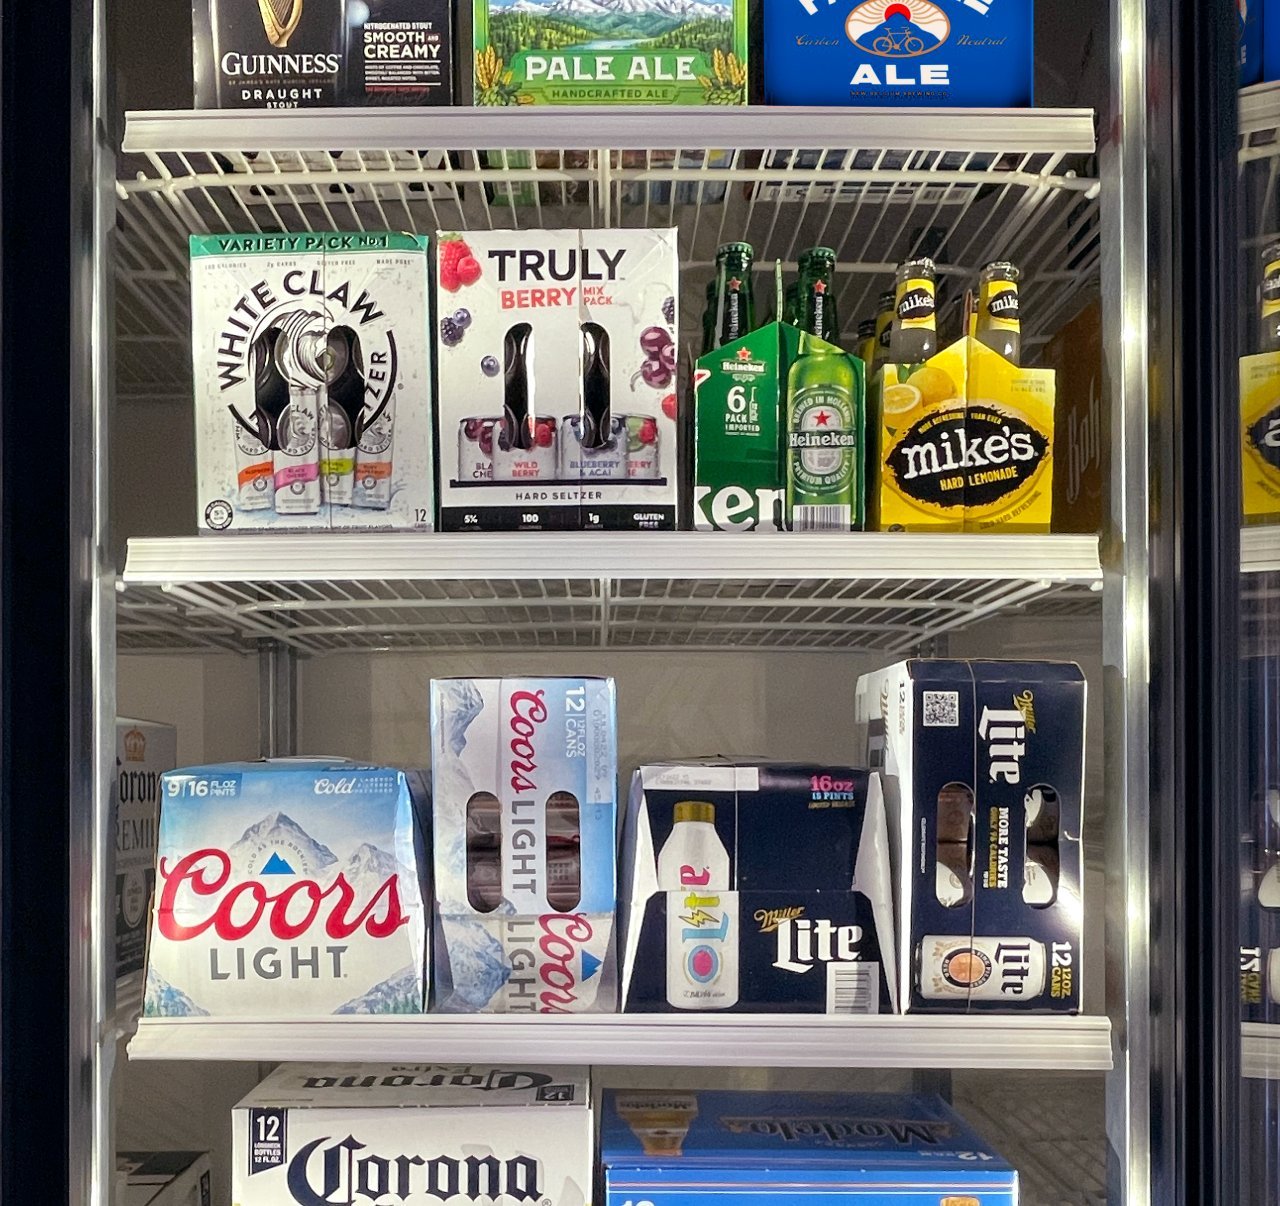 A retail cooler space filled with cases of beverages sold by Reyes Beverage Group